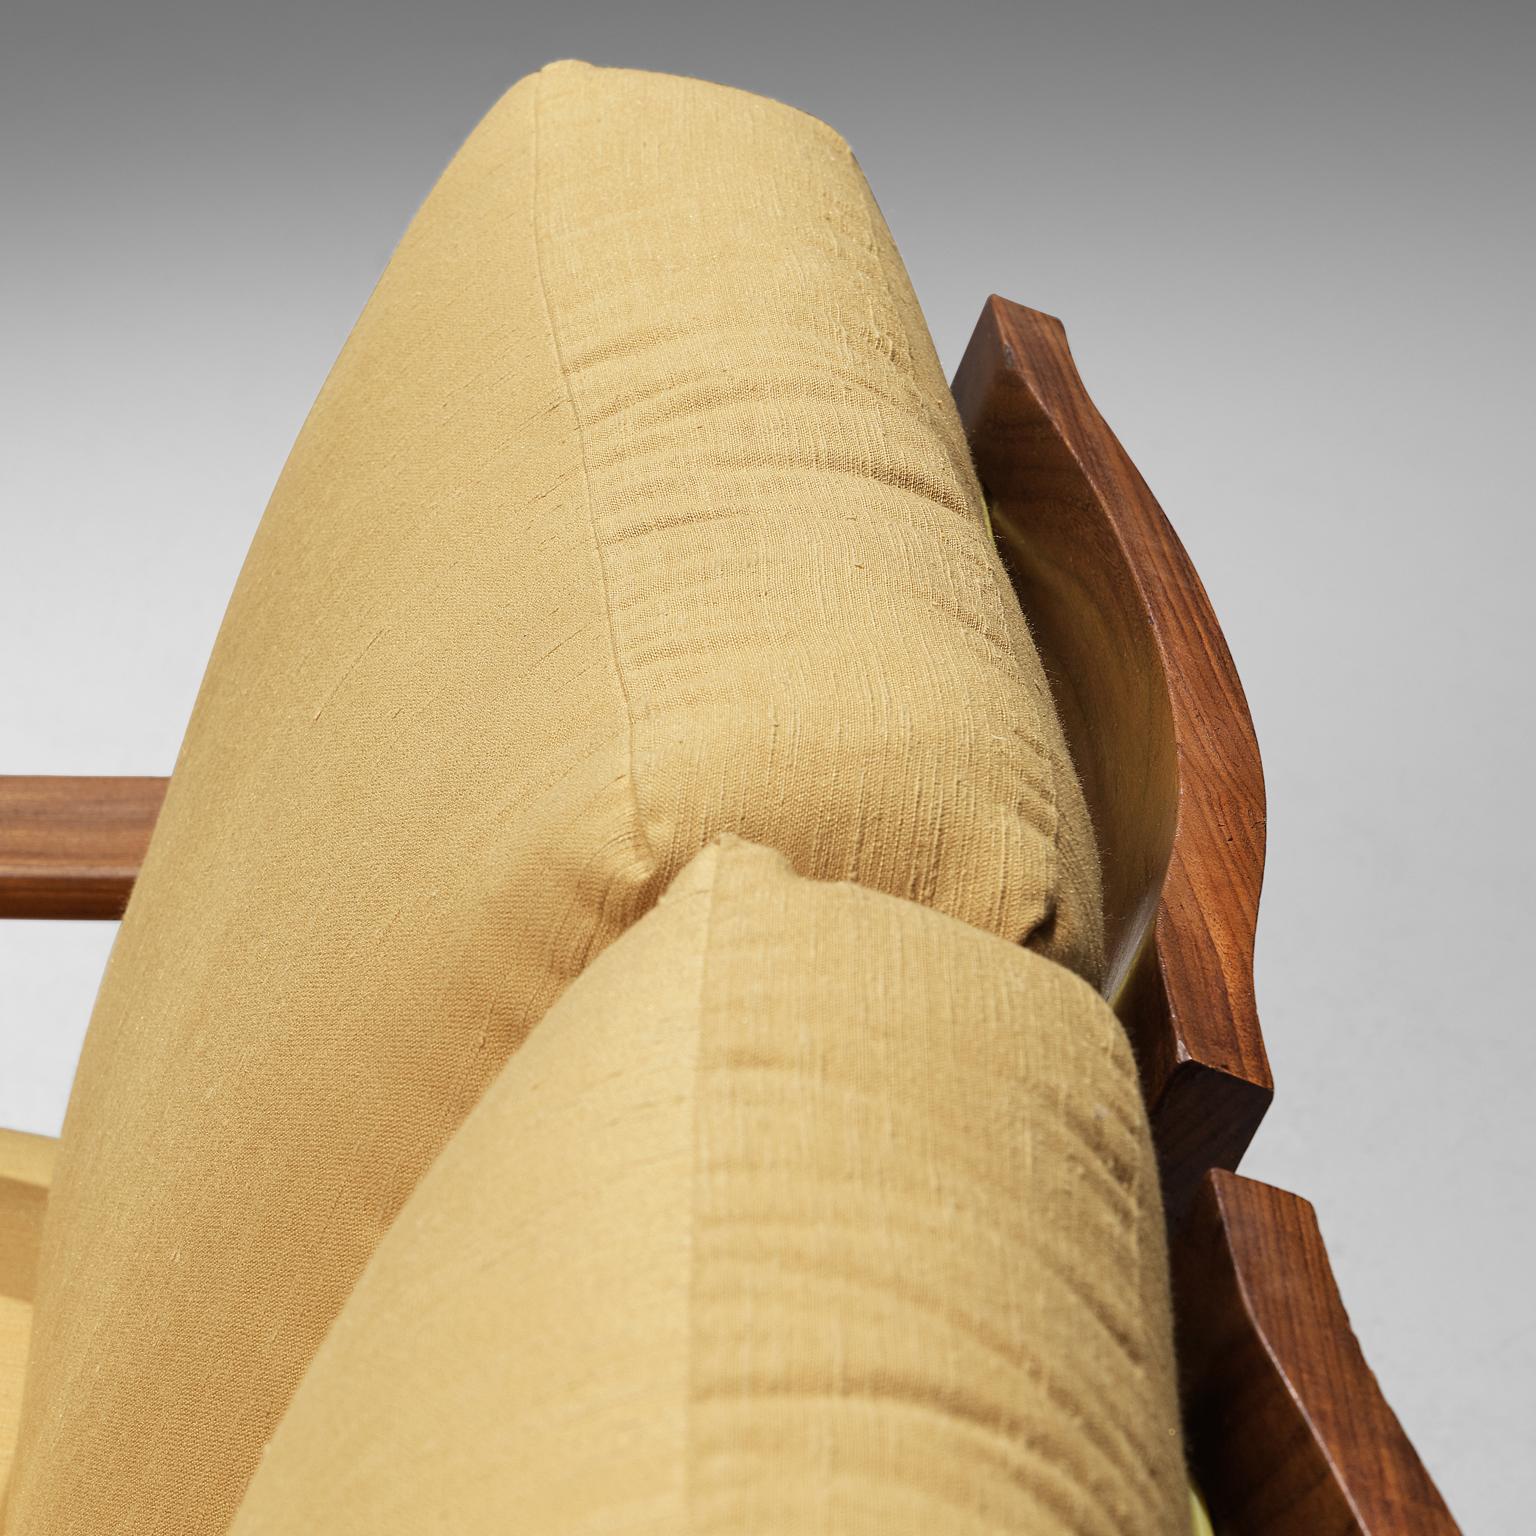 Fratelli Reguitti Sofa Model 'Lord' in Walnut and Yellow Fabric Upholstery 1